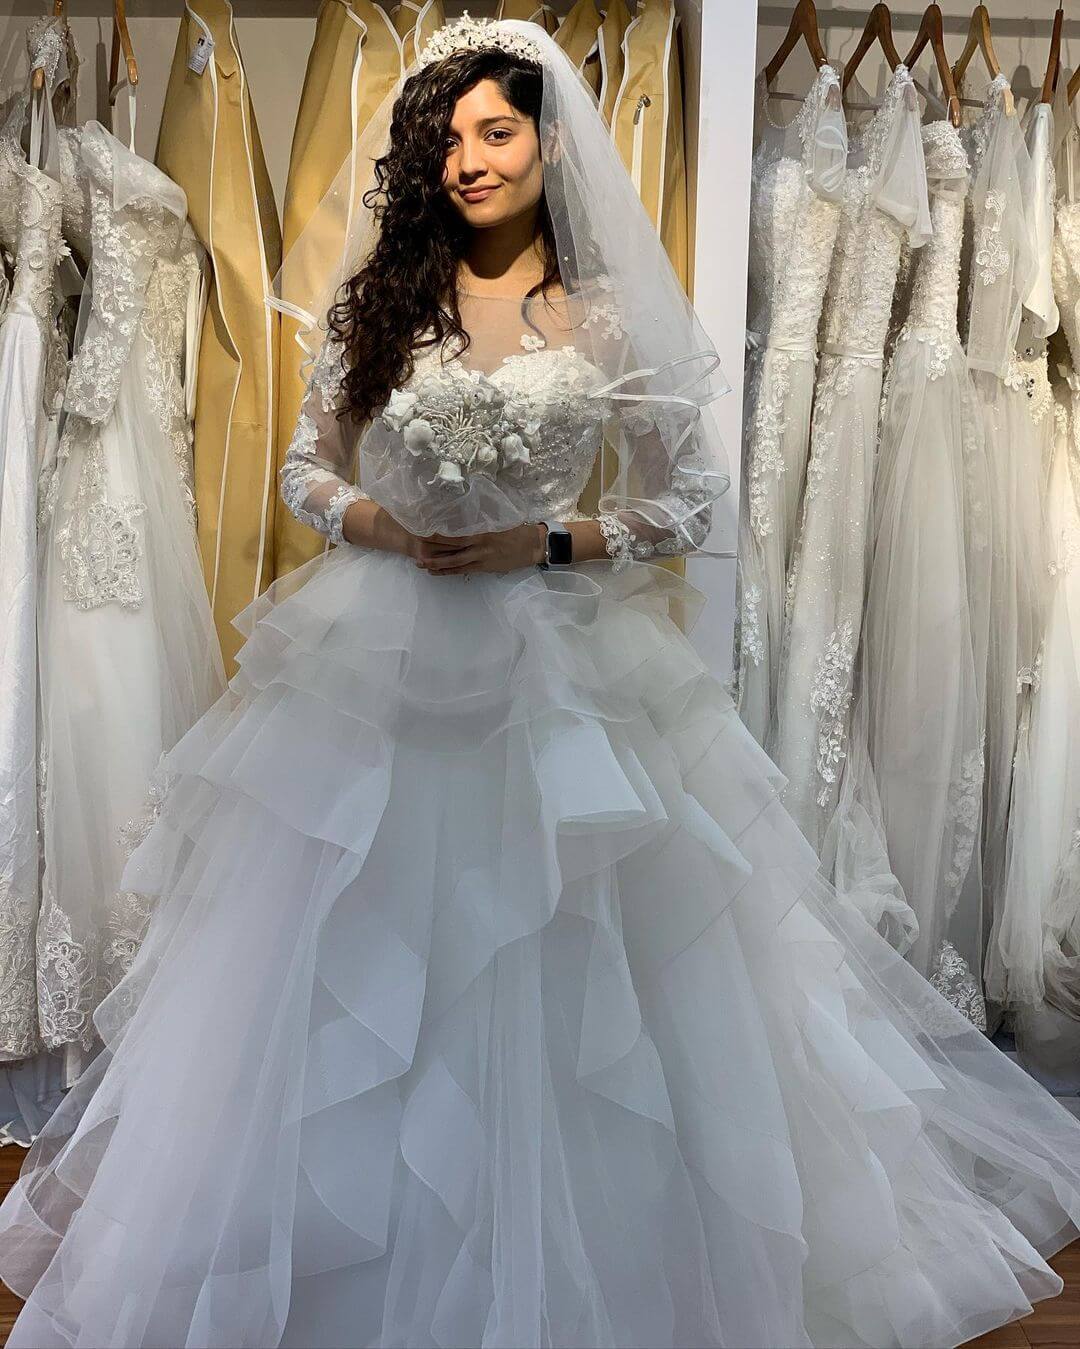 Ritika Singh Gives Us Major Bride Look In White Full-Flared Ruffle Gown Outfit